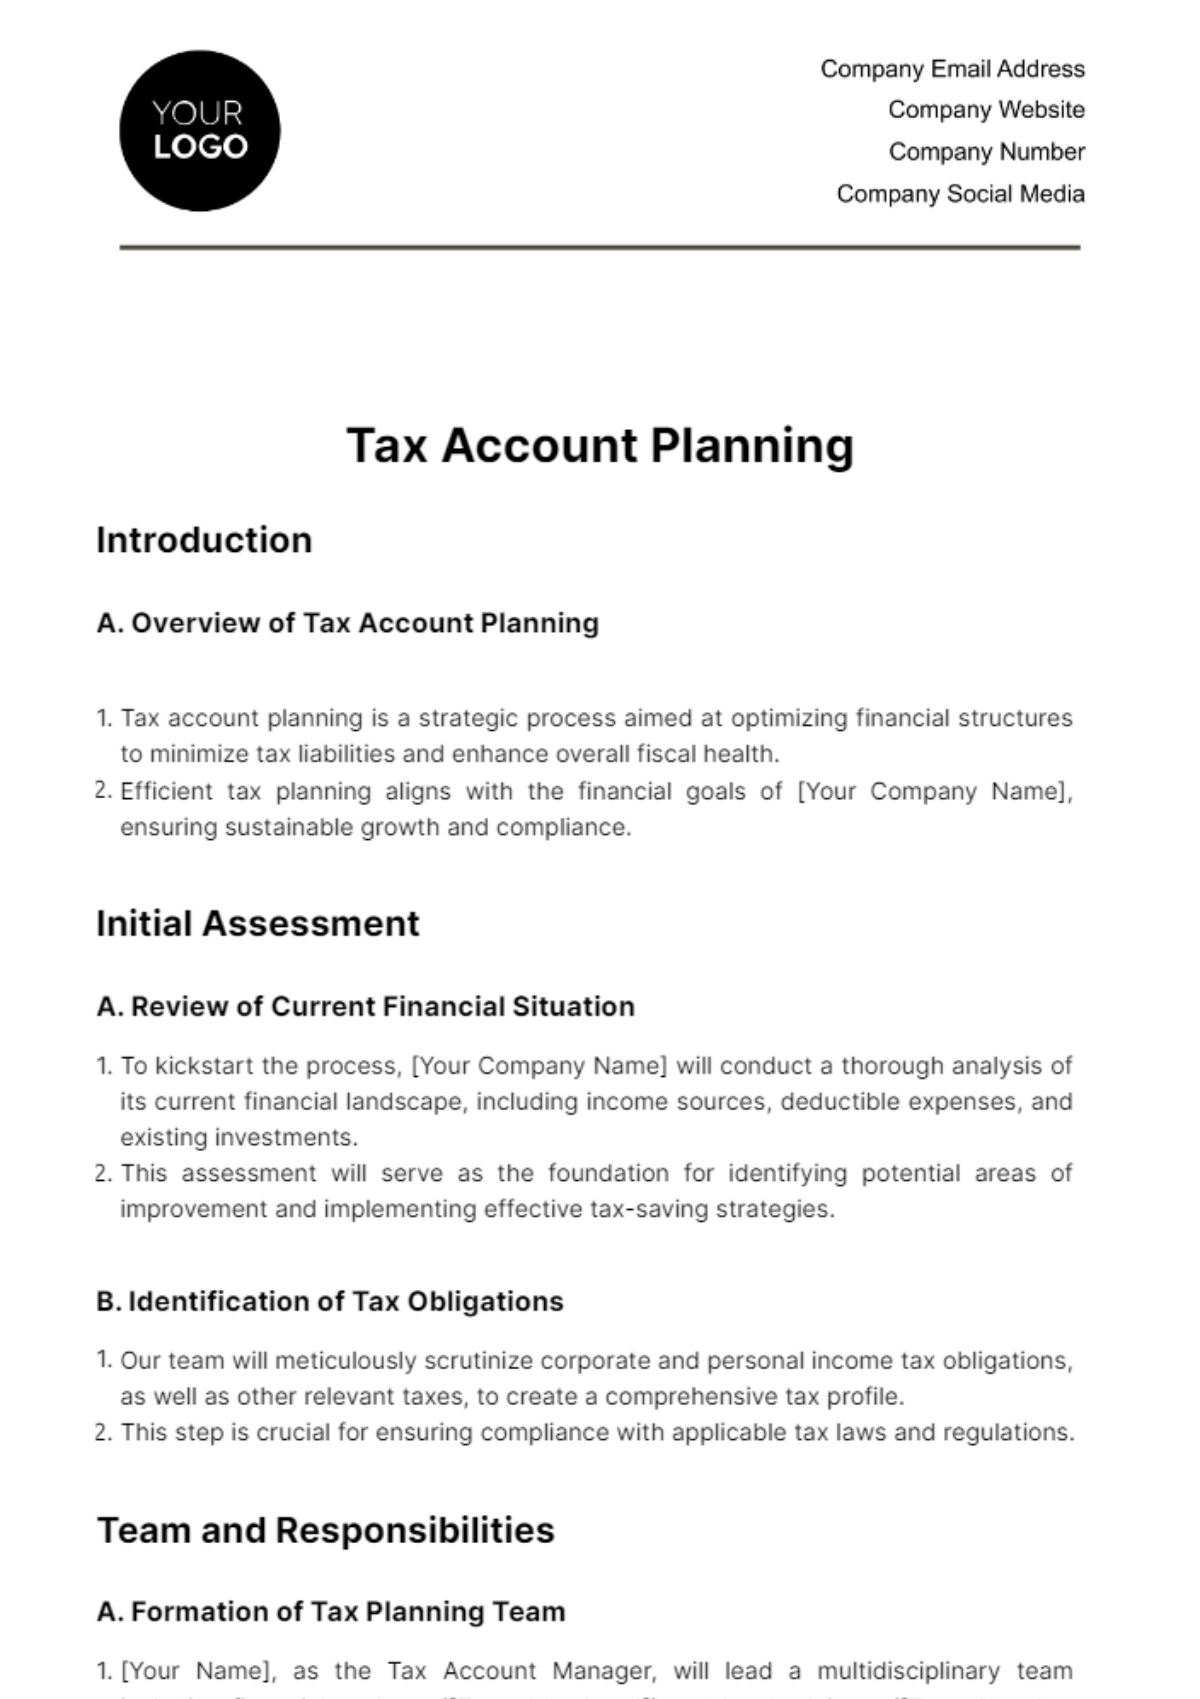 Tax Account Planning Template